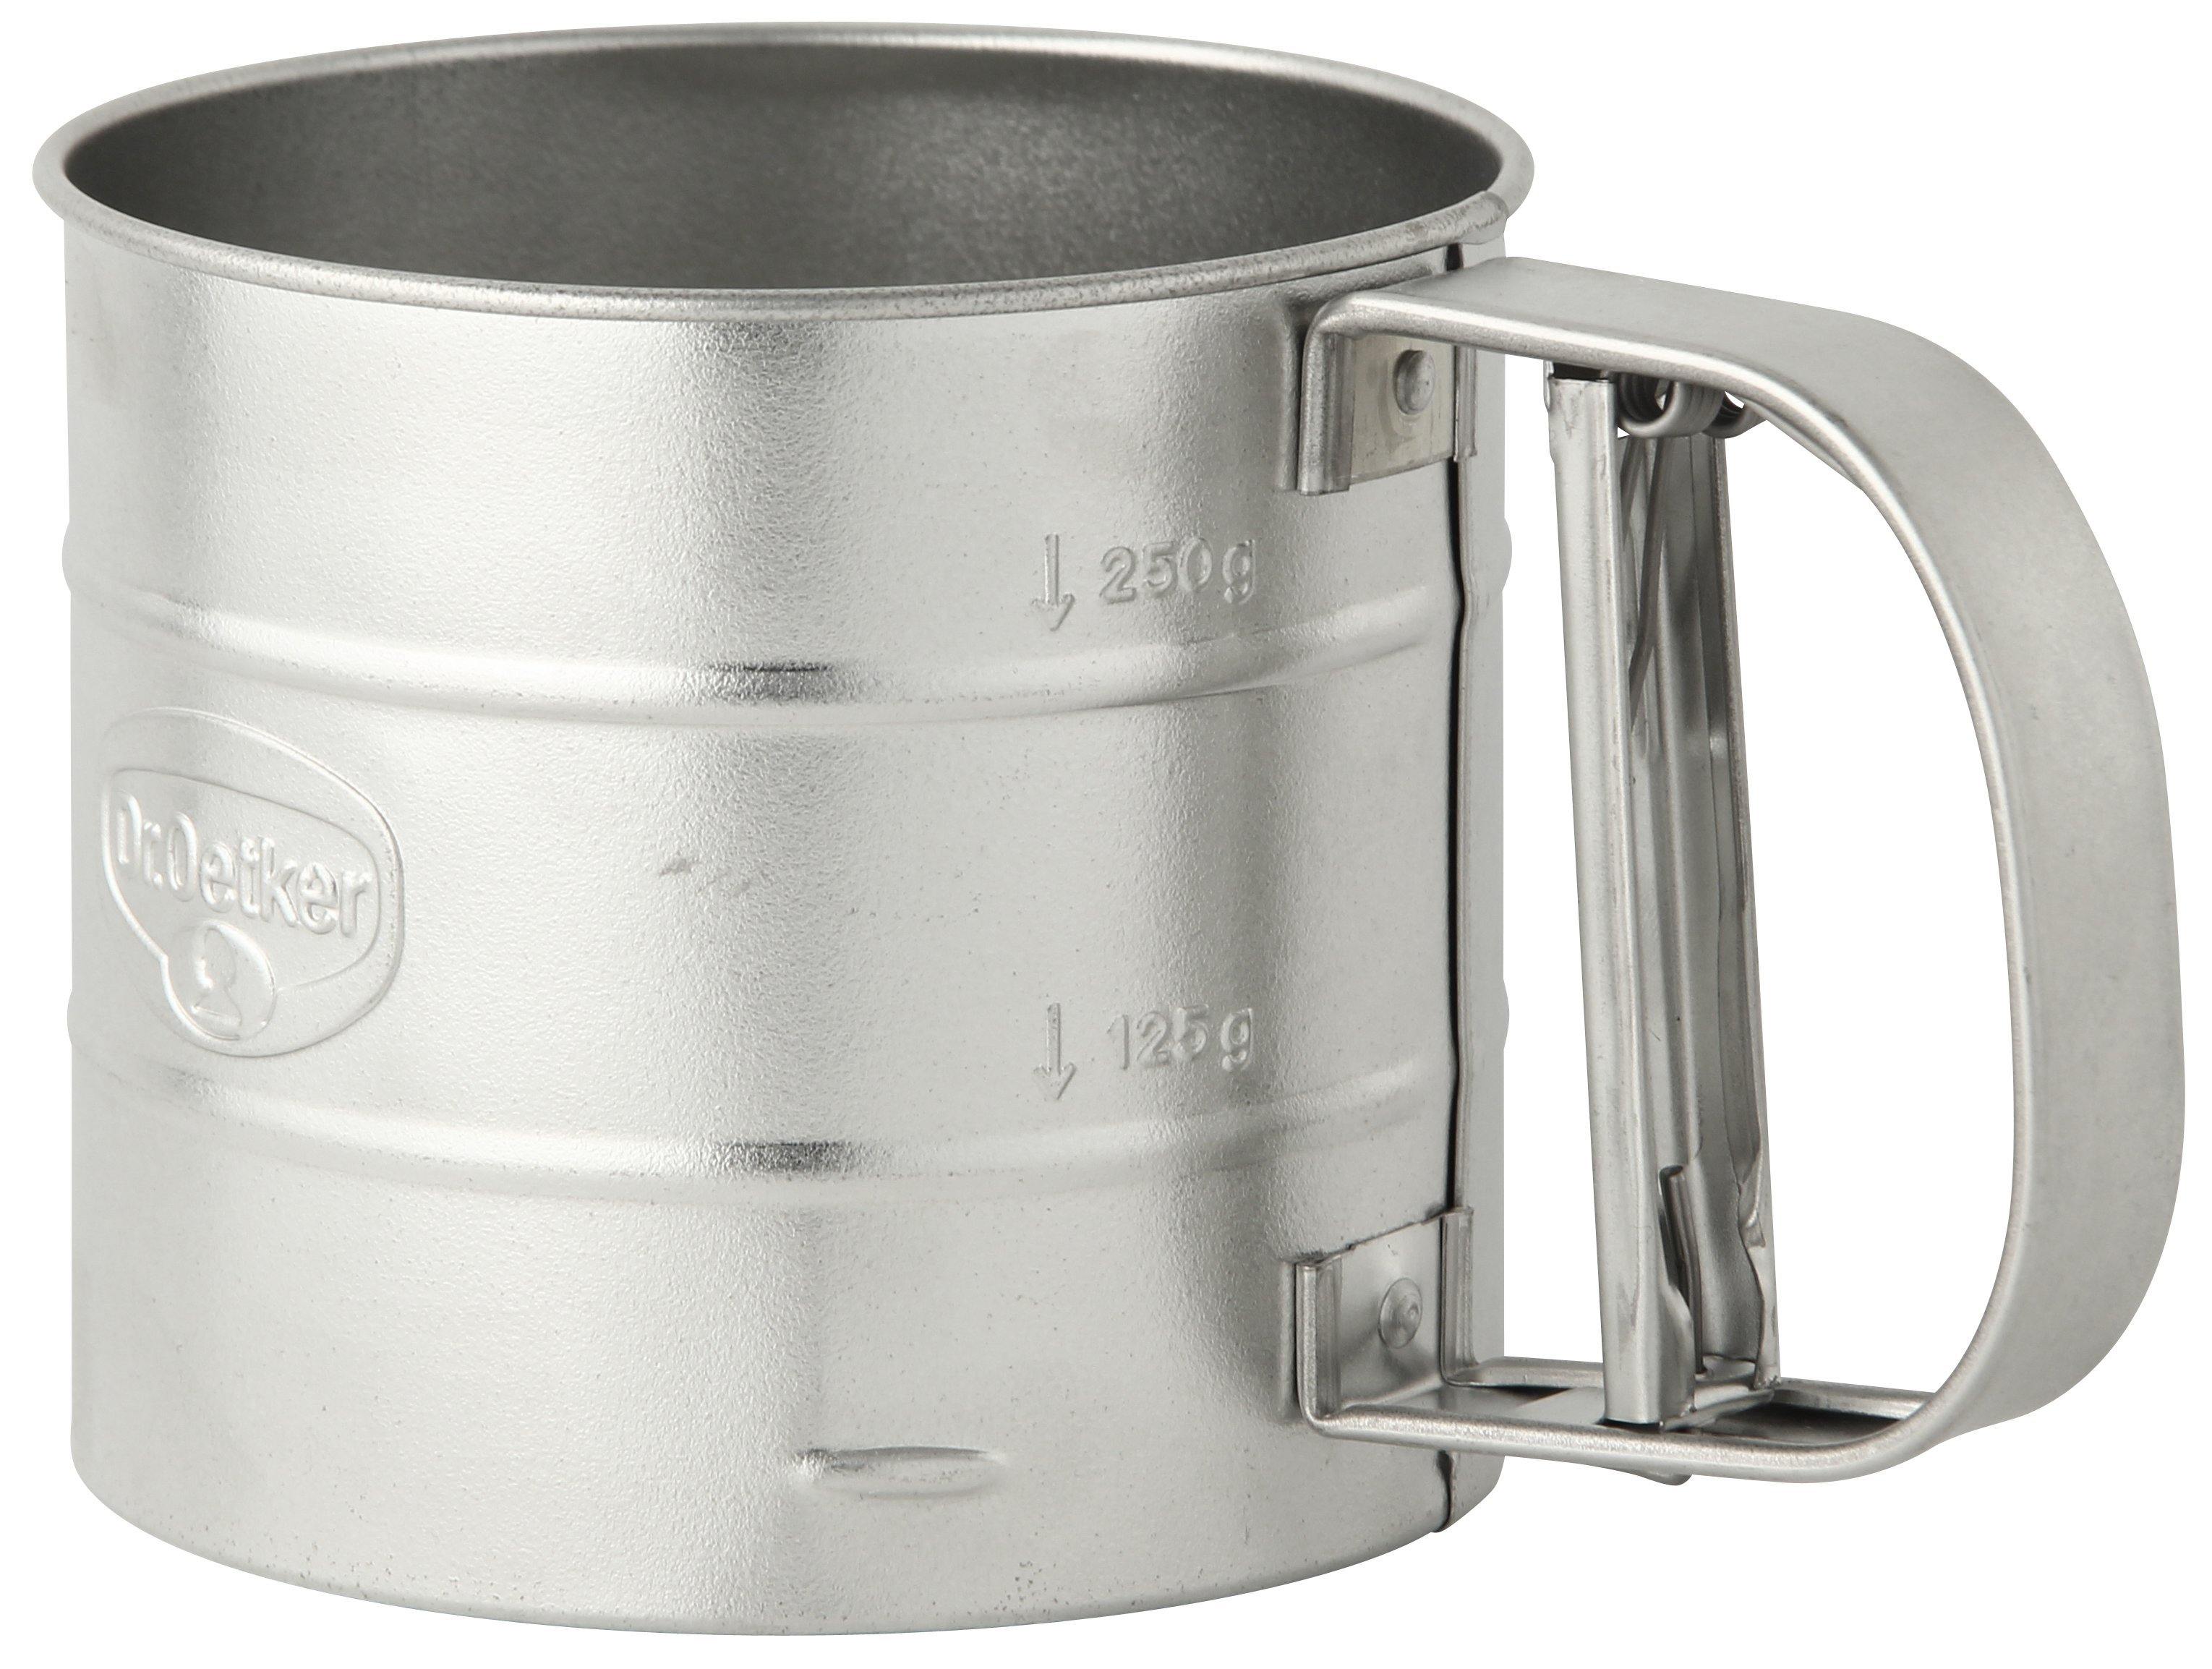 Dr. Oetker One-Hand Flour Sifter Metal 350G, Silver, 10.5X9.5 Cm - Whole and All